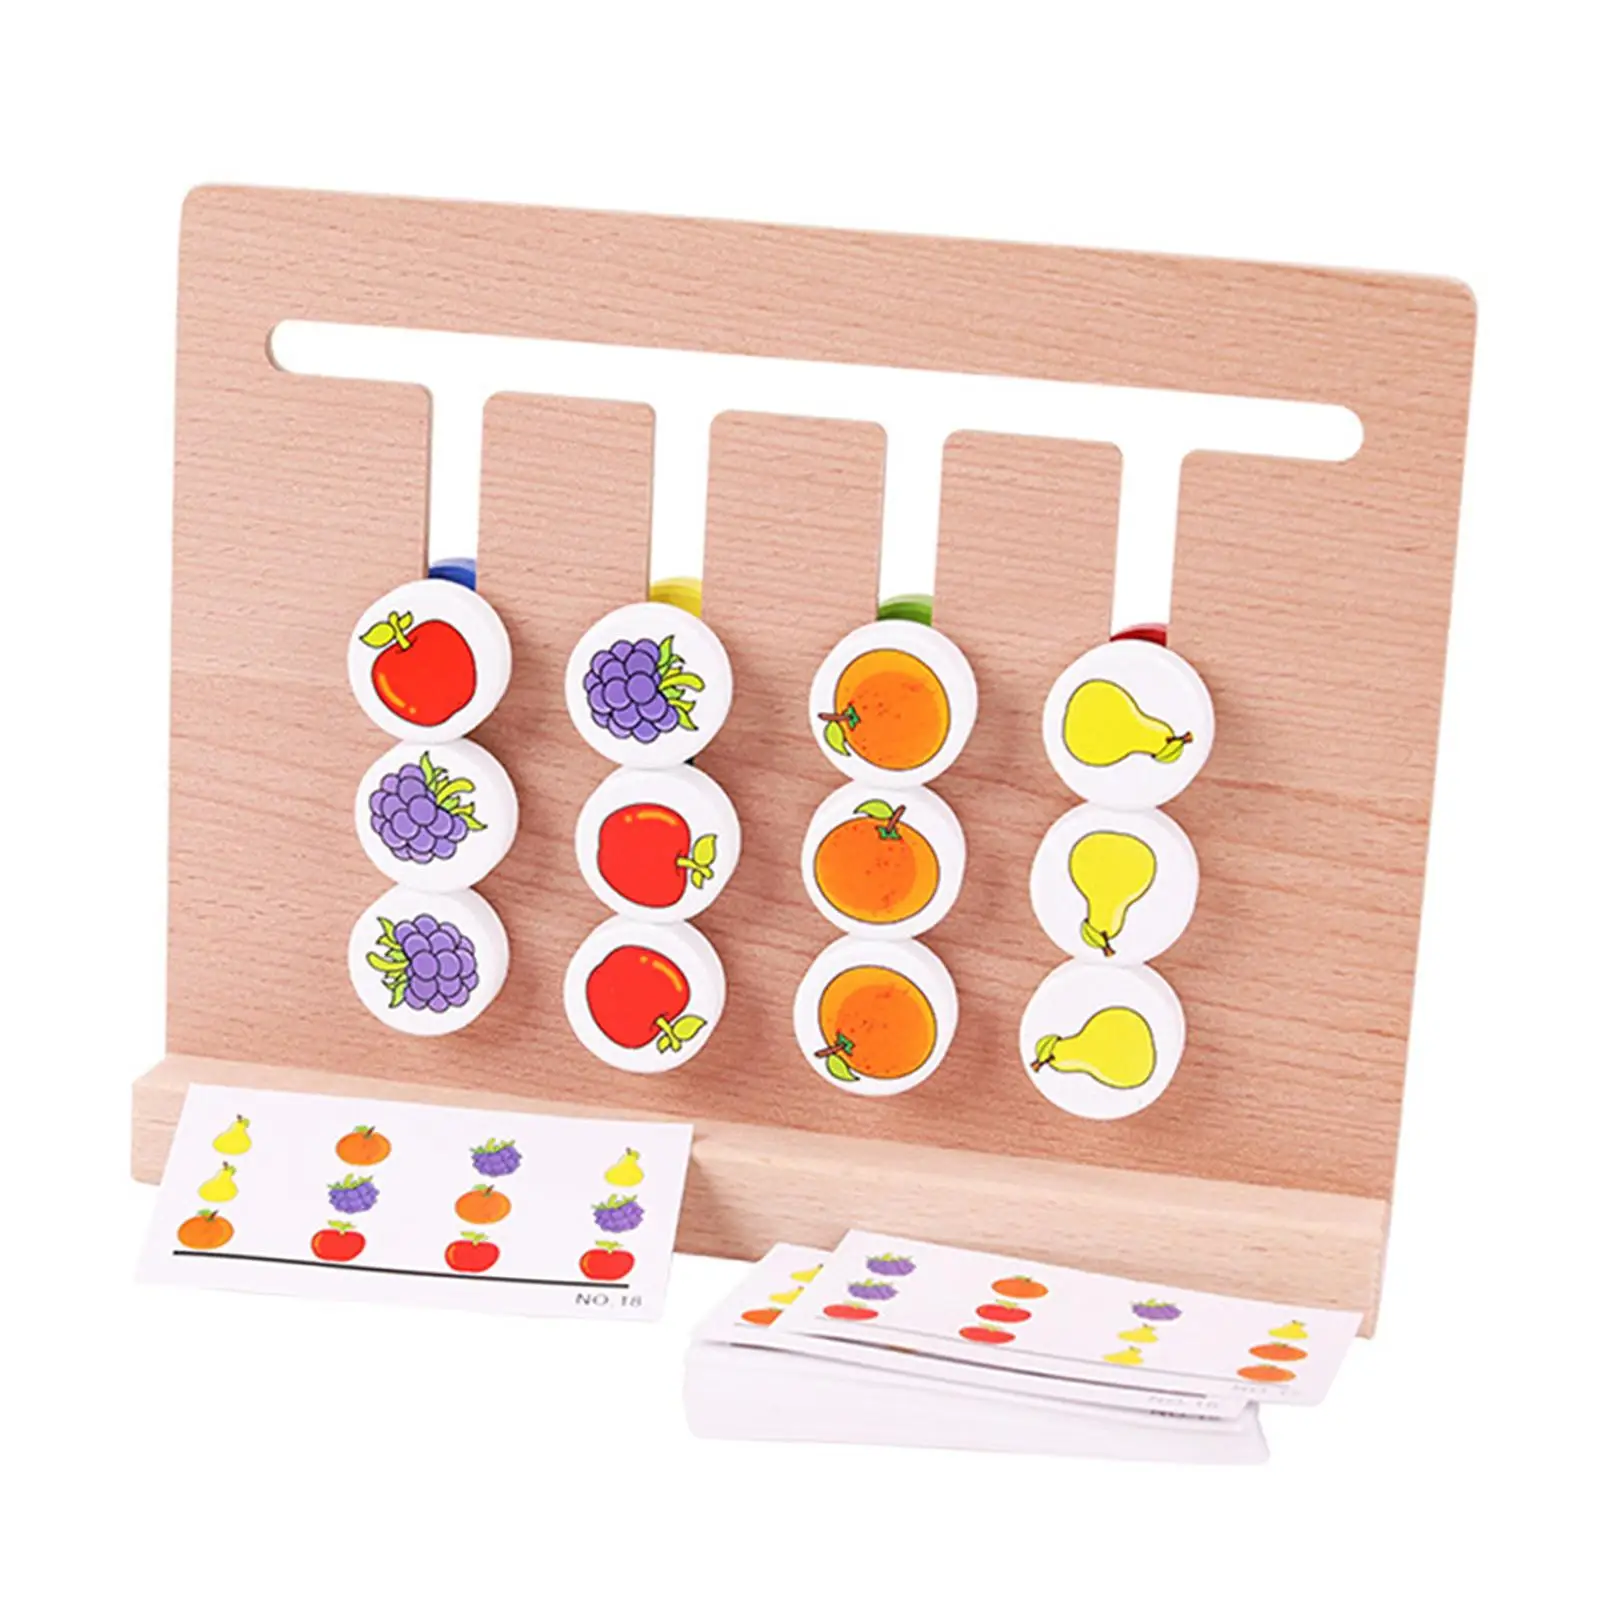 Early Education Matching Logical Game Gifts Double Sided Practical Multipurpose Color Sort Board for Kindergarten Girls Boys